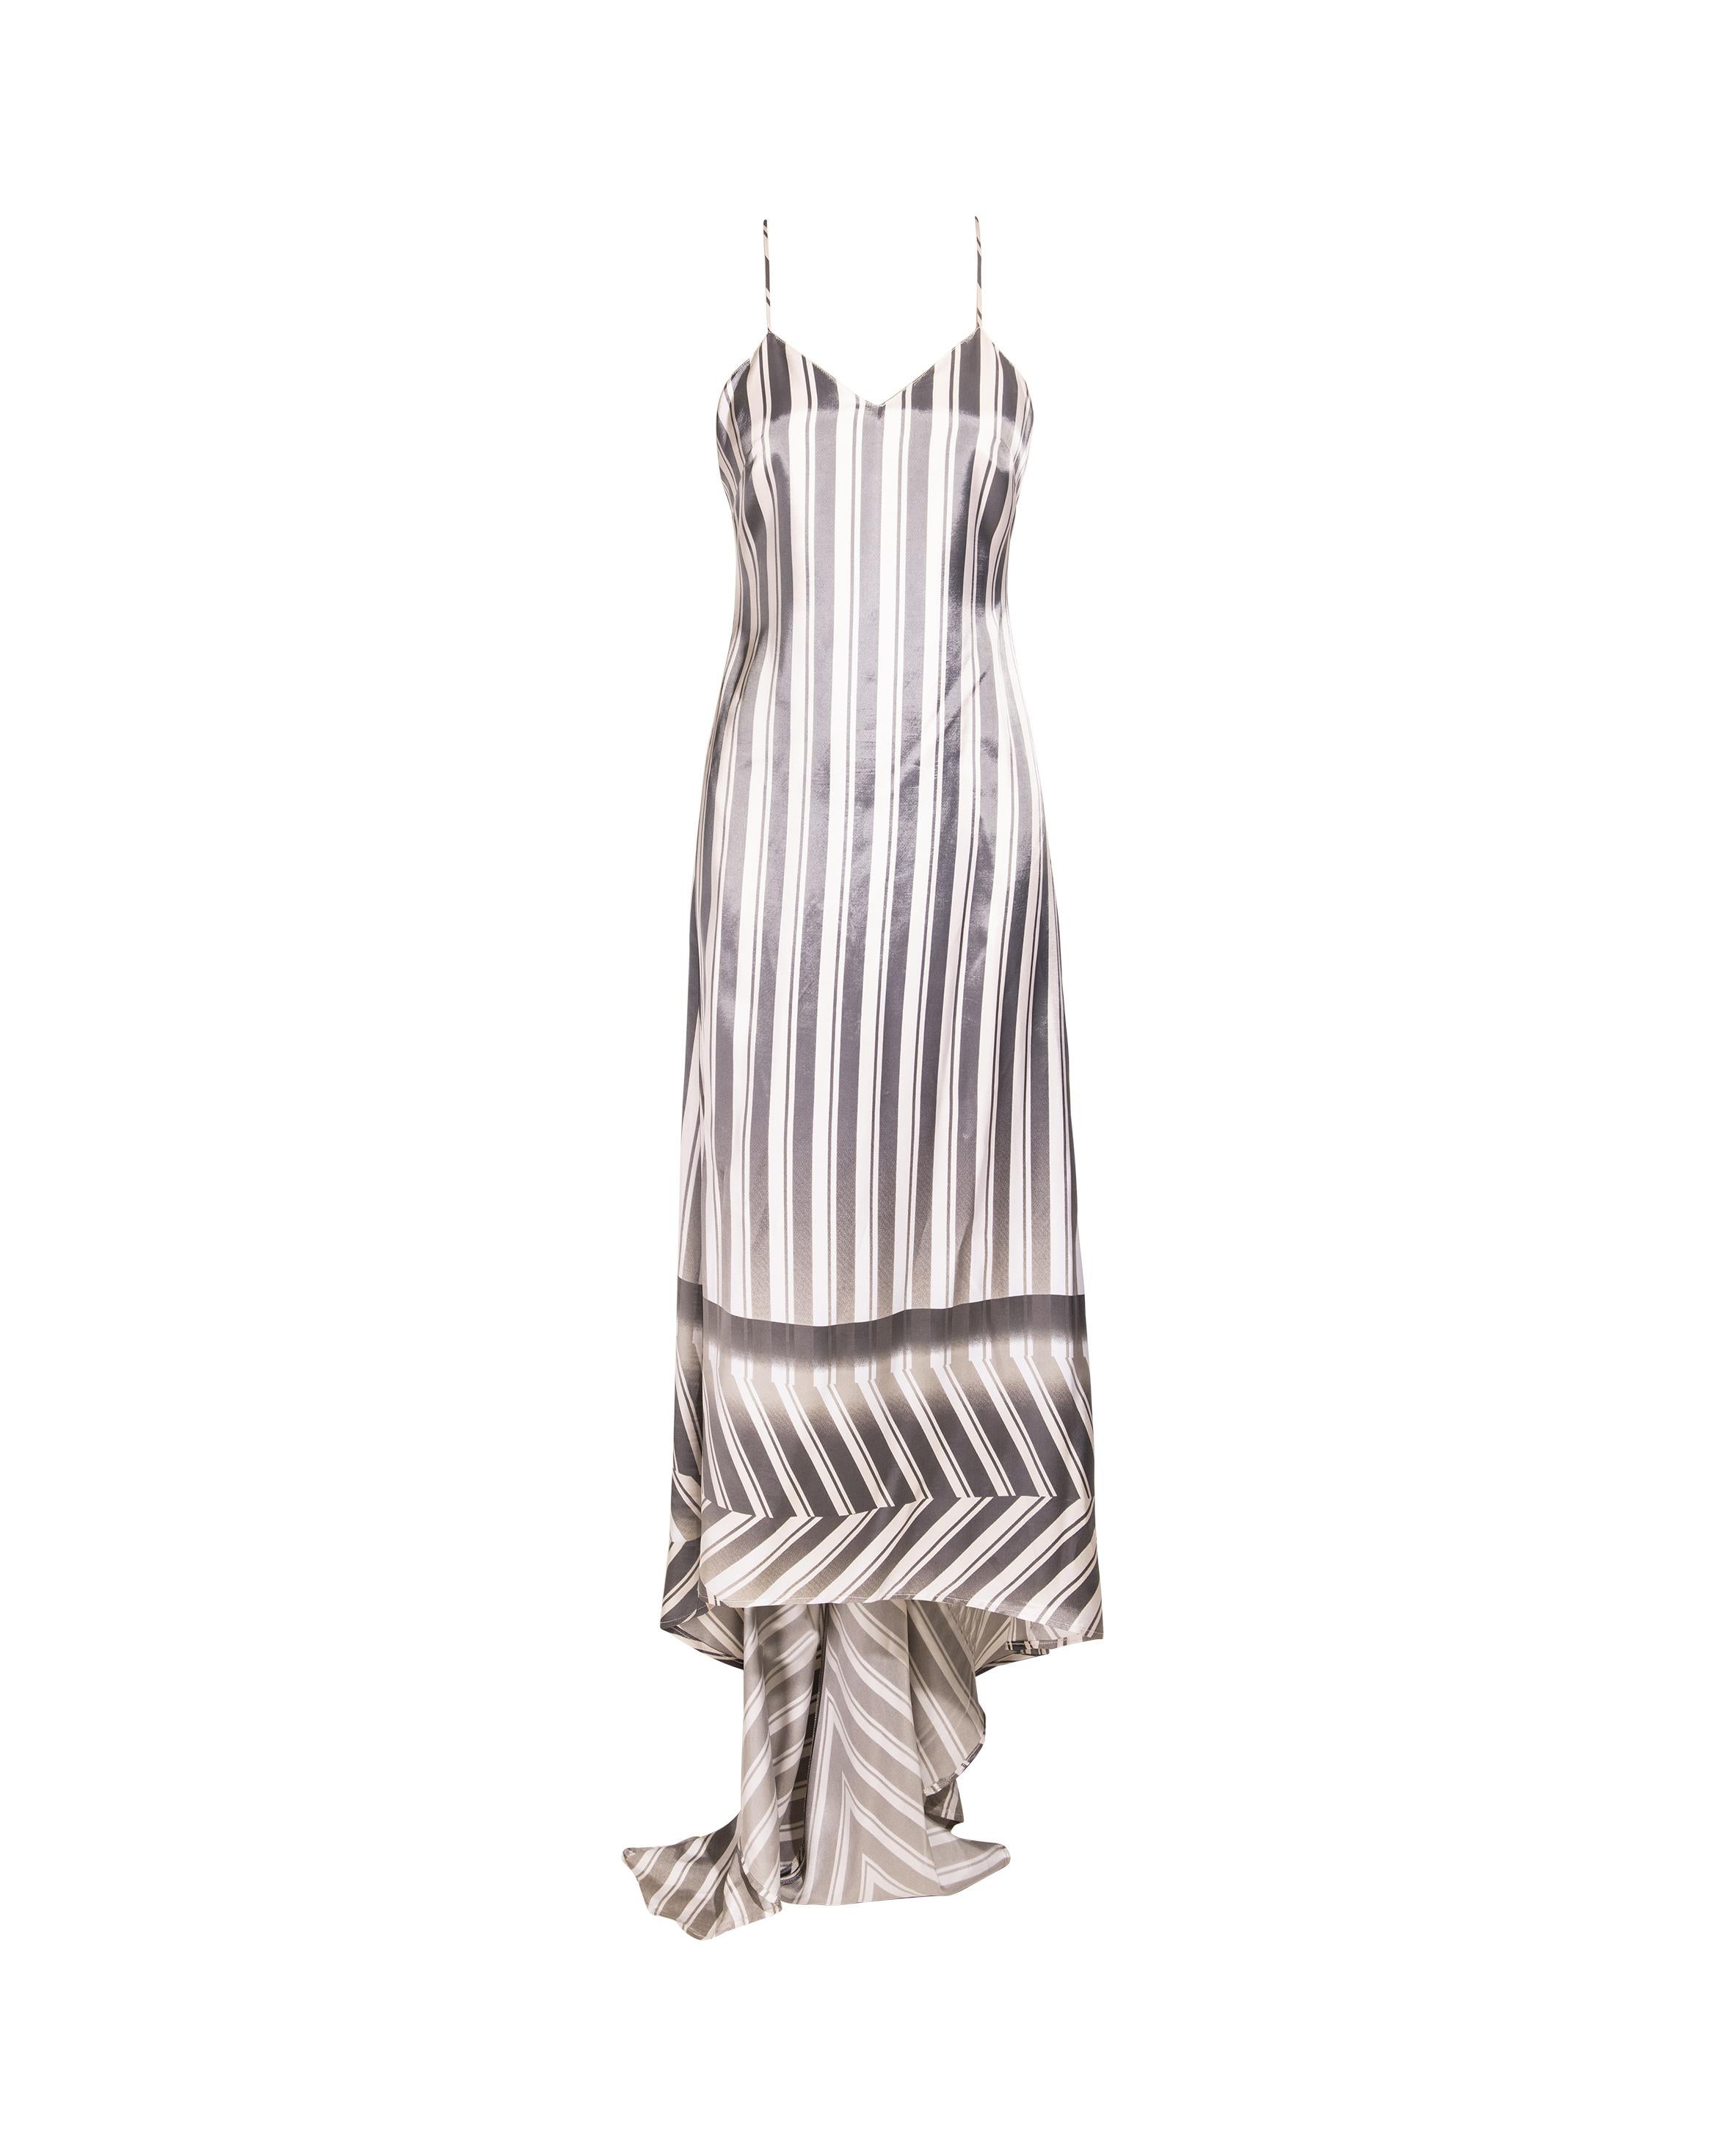 S/S 1999 Dries Van Noten White and Gray Gradient Stripe Bustle Gown For Sale 1